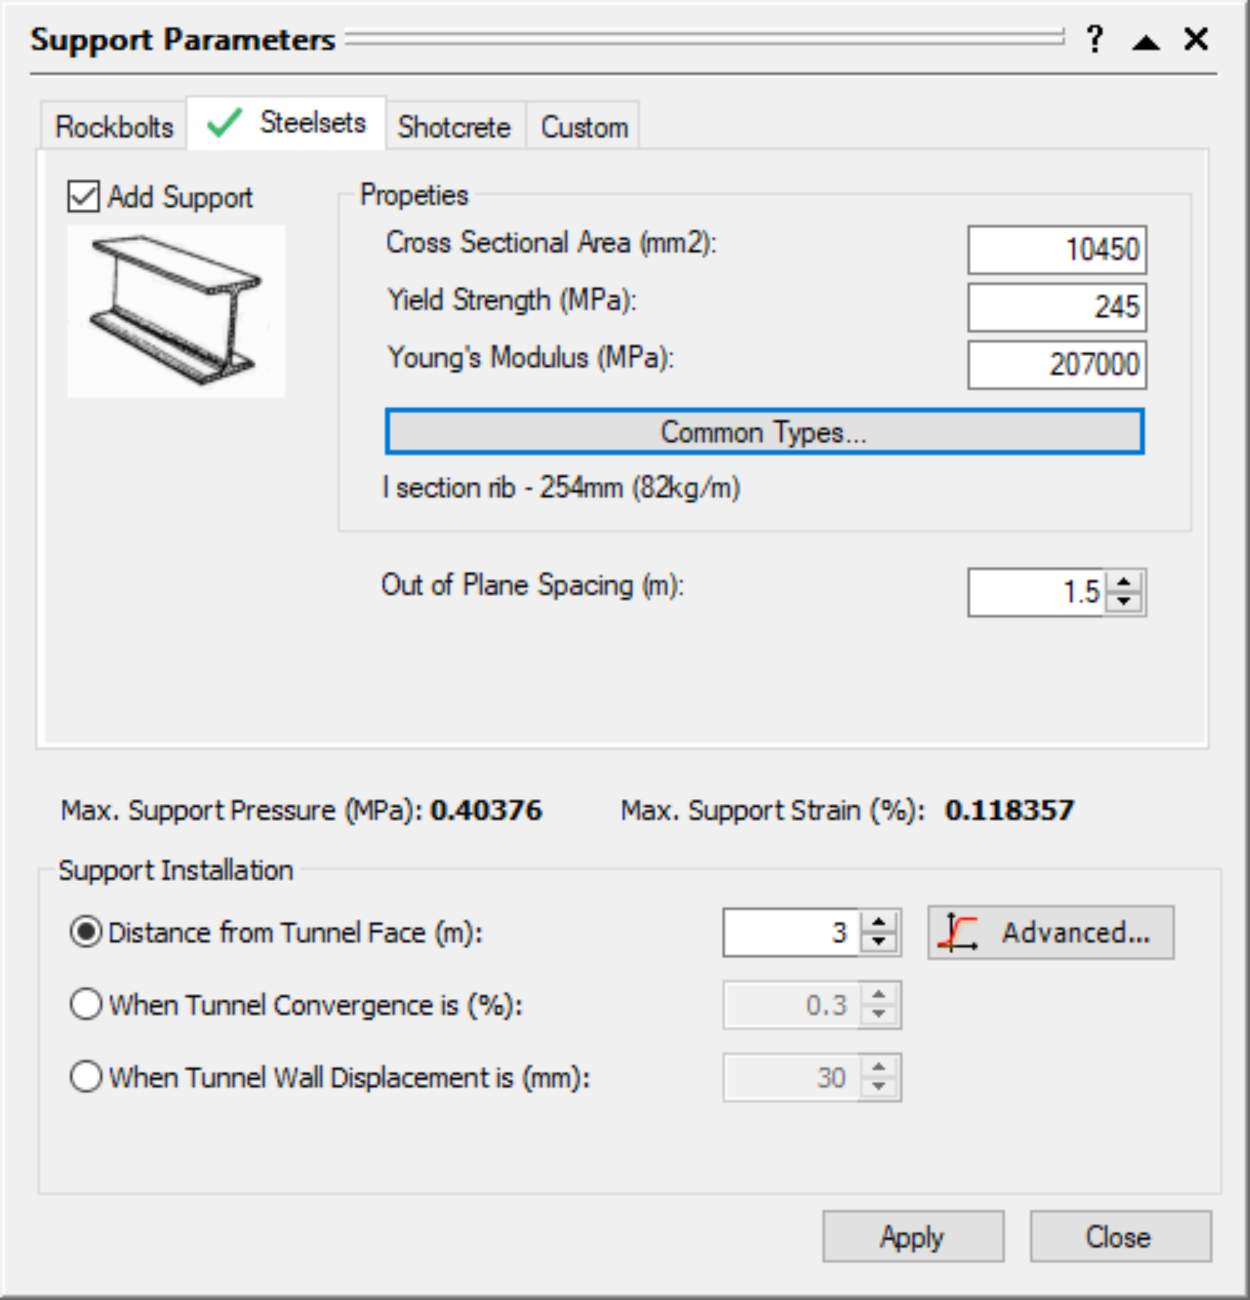 Support Parameters Steelsets tab